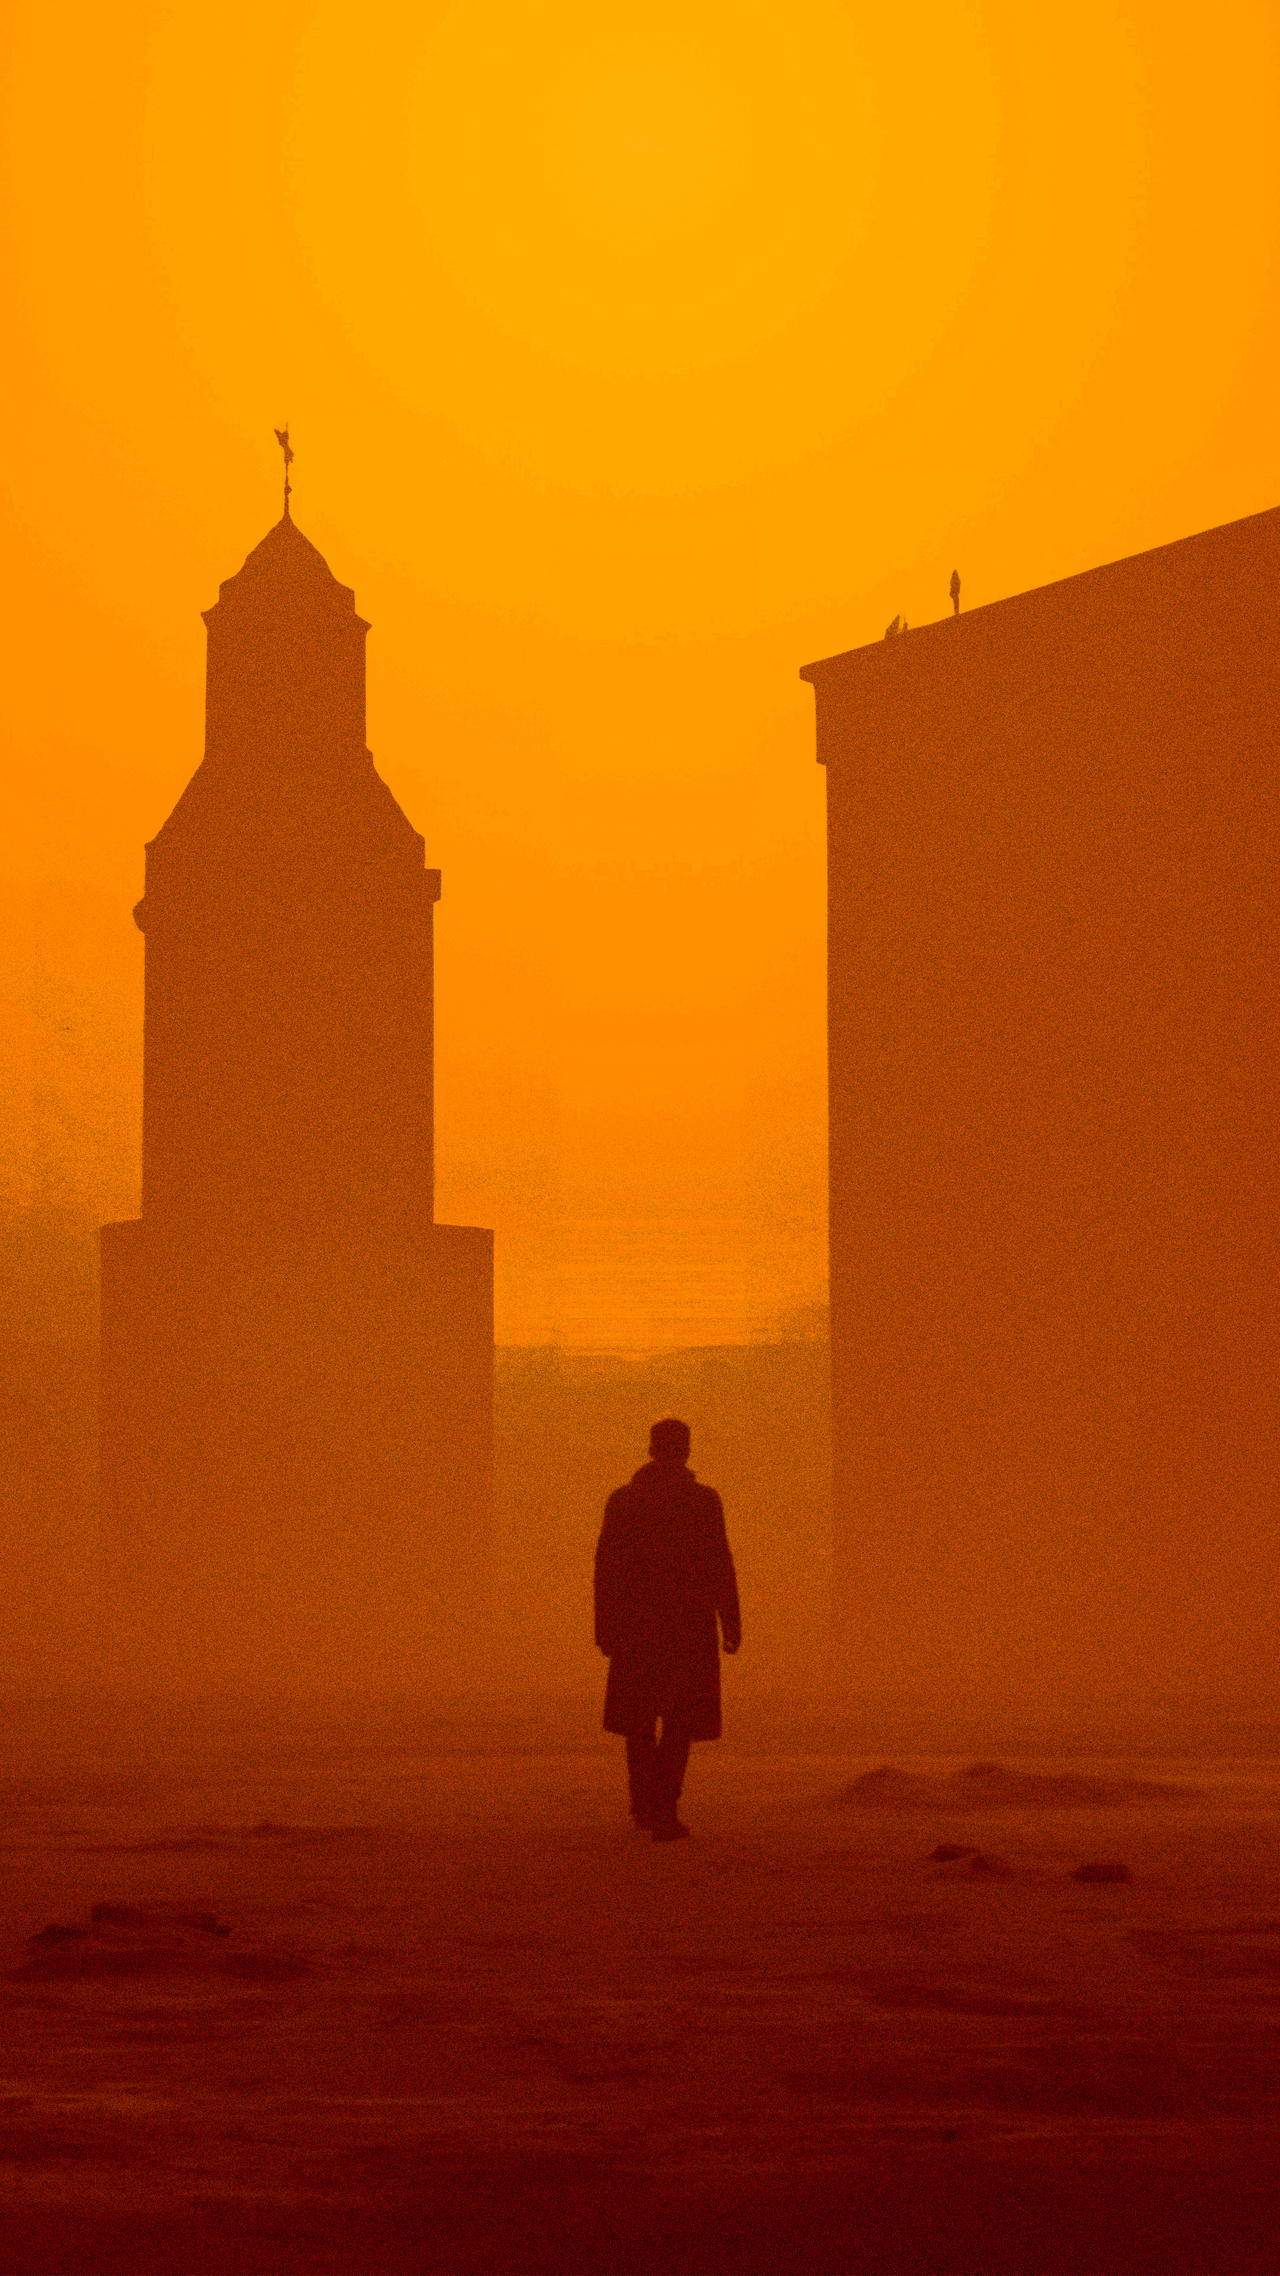 blade runner movie action still of a silhouetted